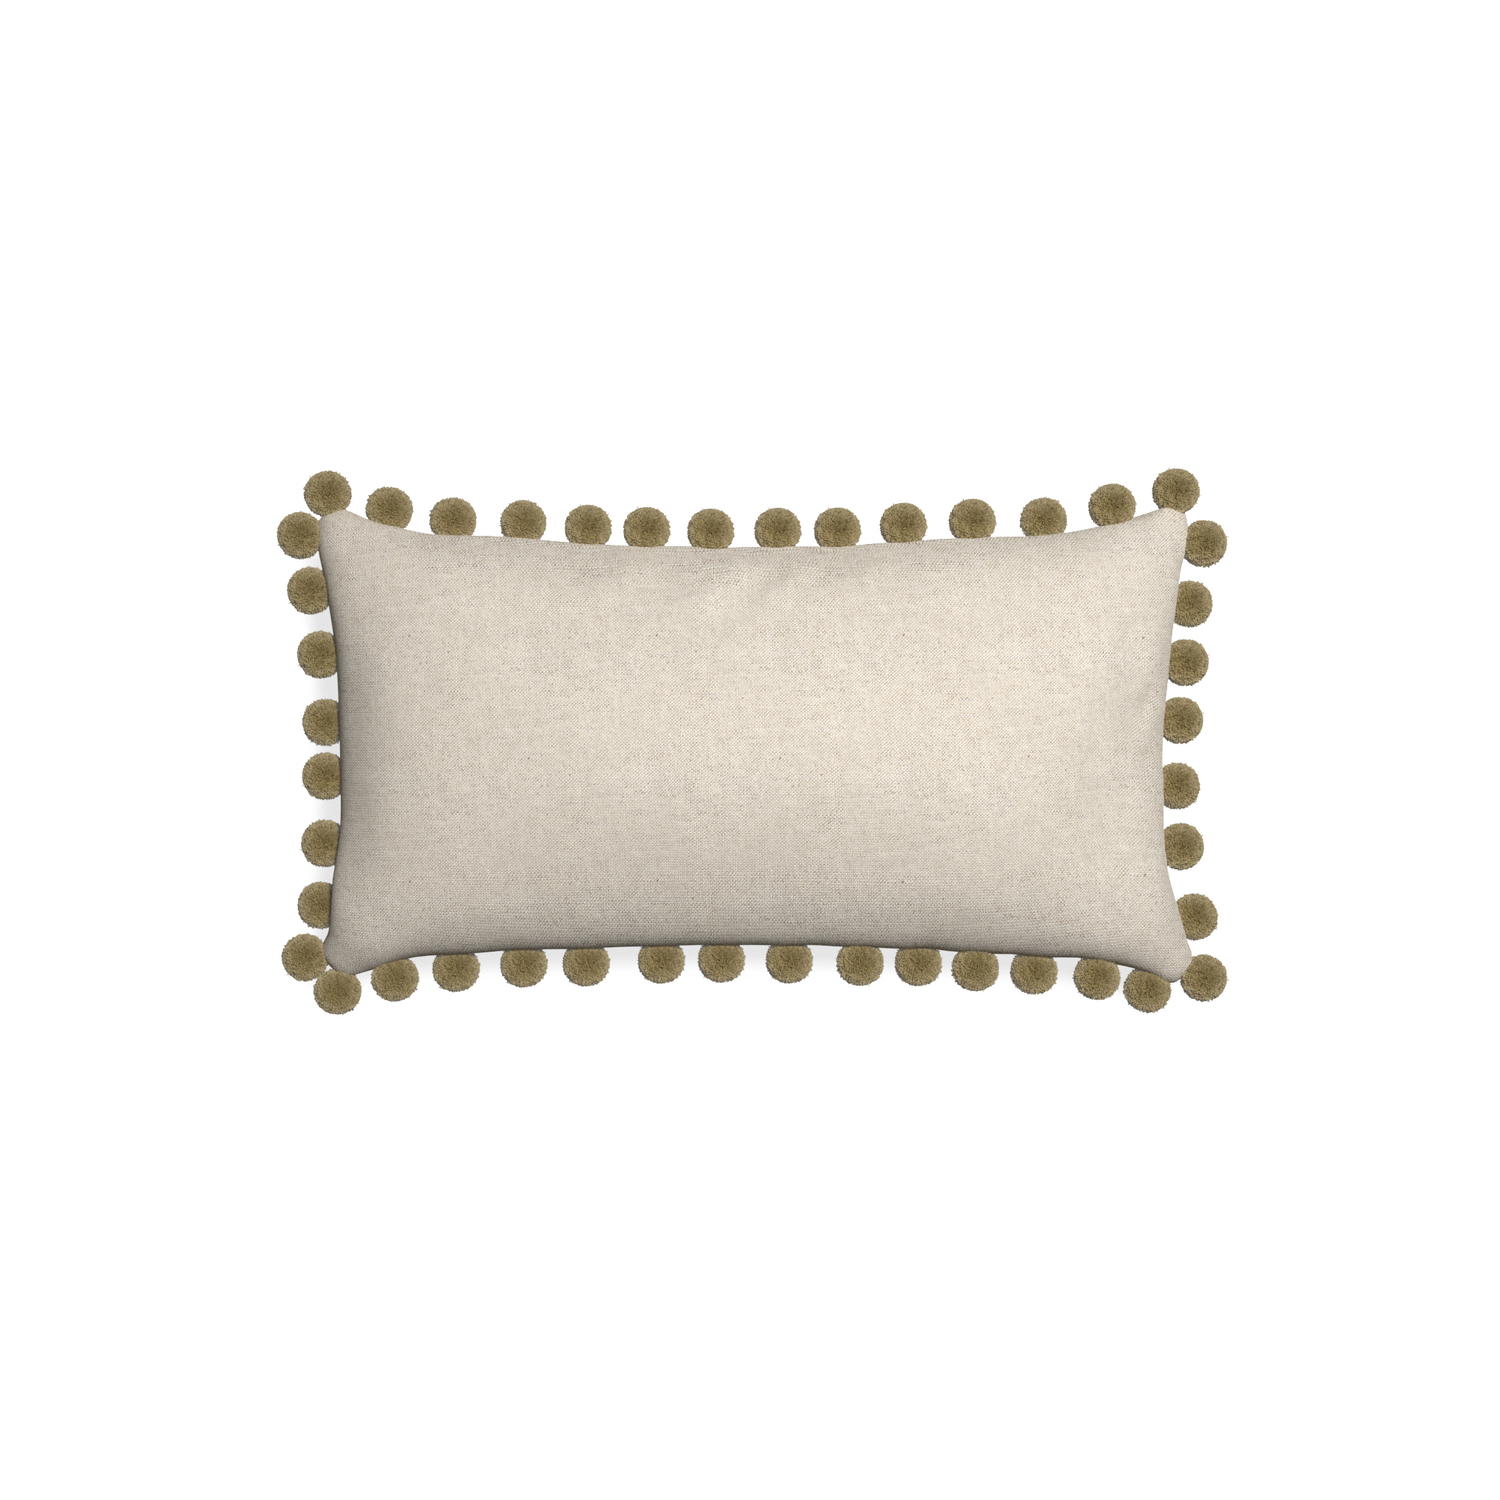 Petite-lumbar oat custom light brownpillow with olive pom pom on white background